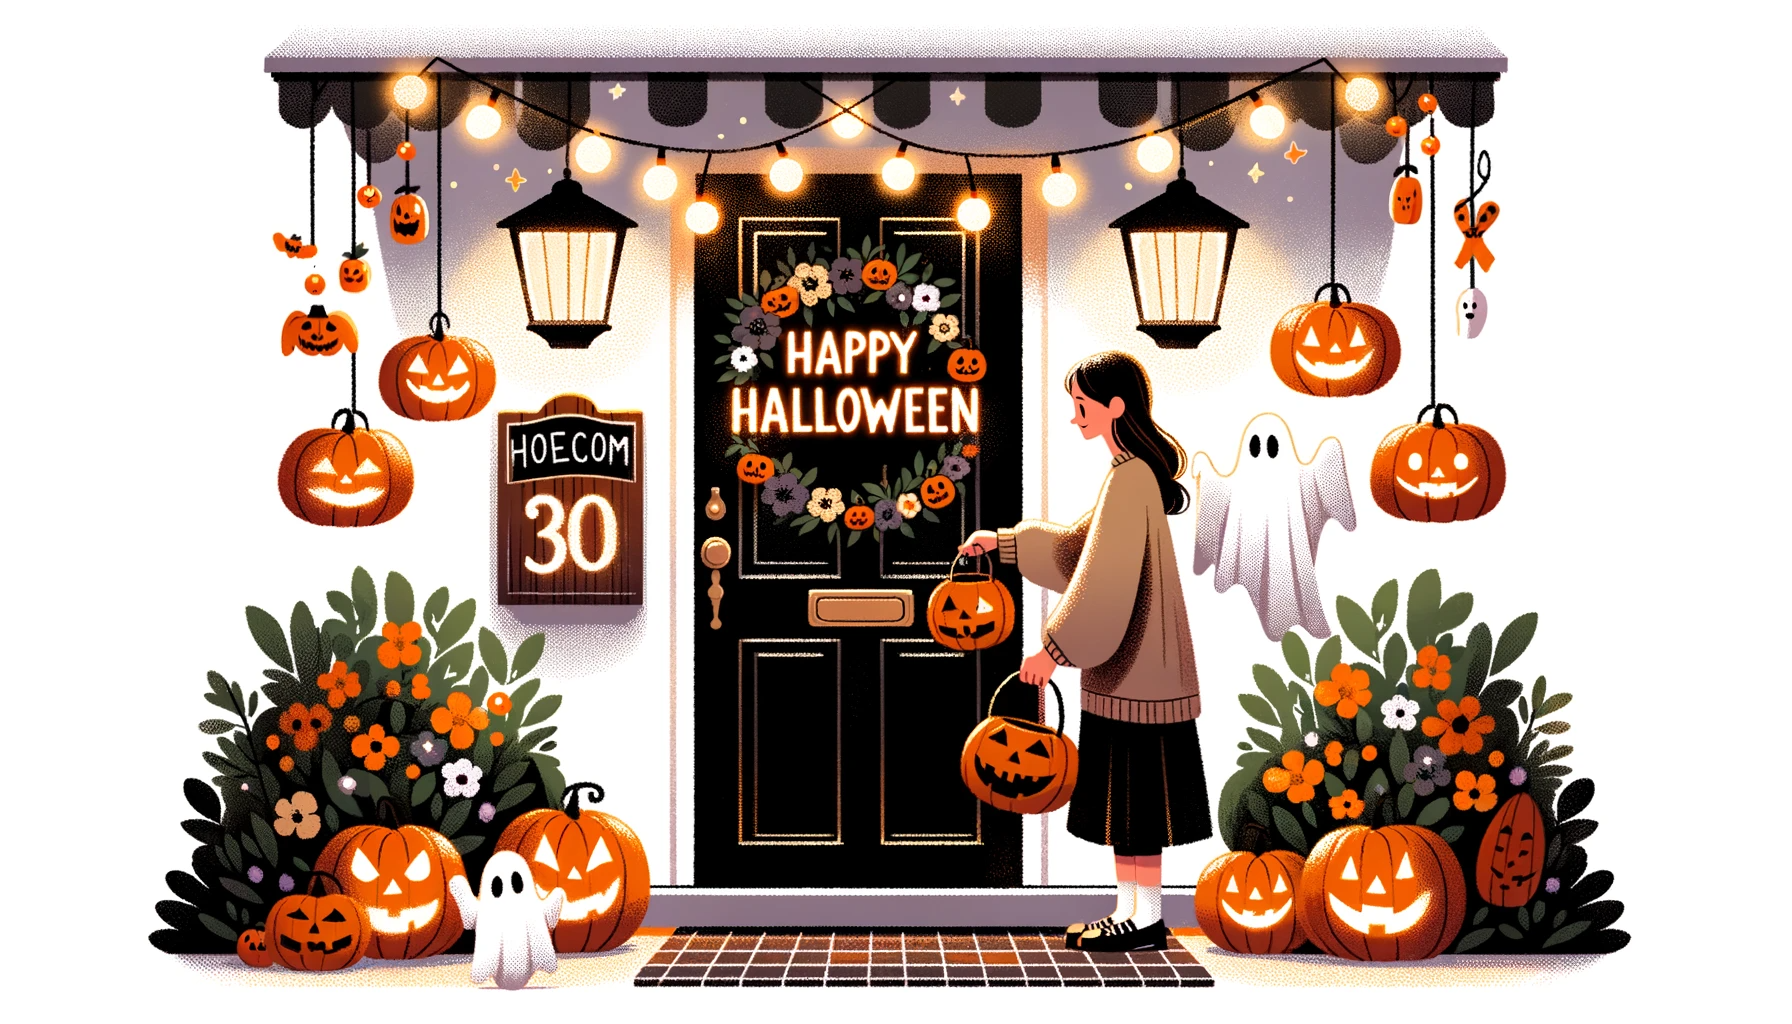 Illustration on a white background, styled similarly to the second image: A woman opens the door to greet trick-or-treaters, her home entrance decorated with glowing jack-o-lanterns, hanging ghosts, and a whimsical 'Happy Halloween' sign.